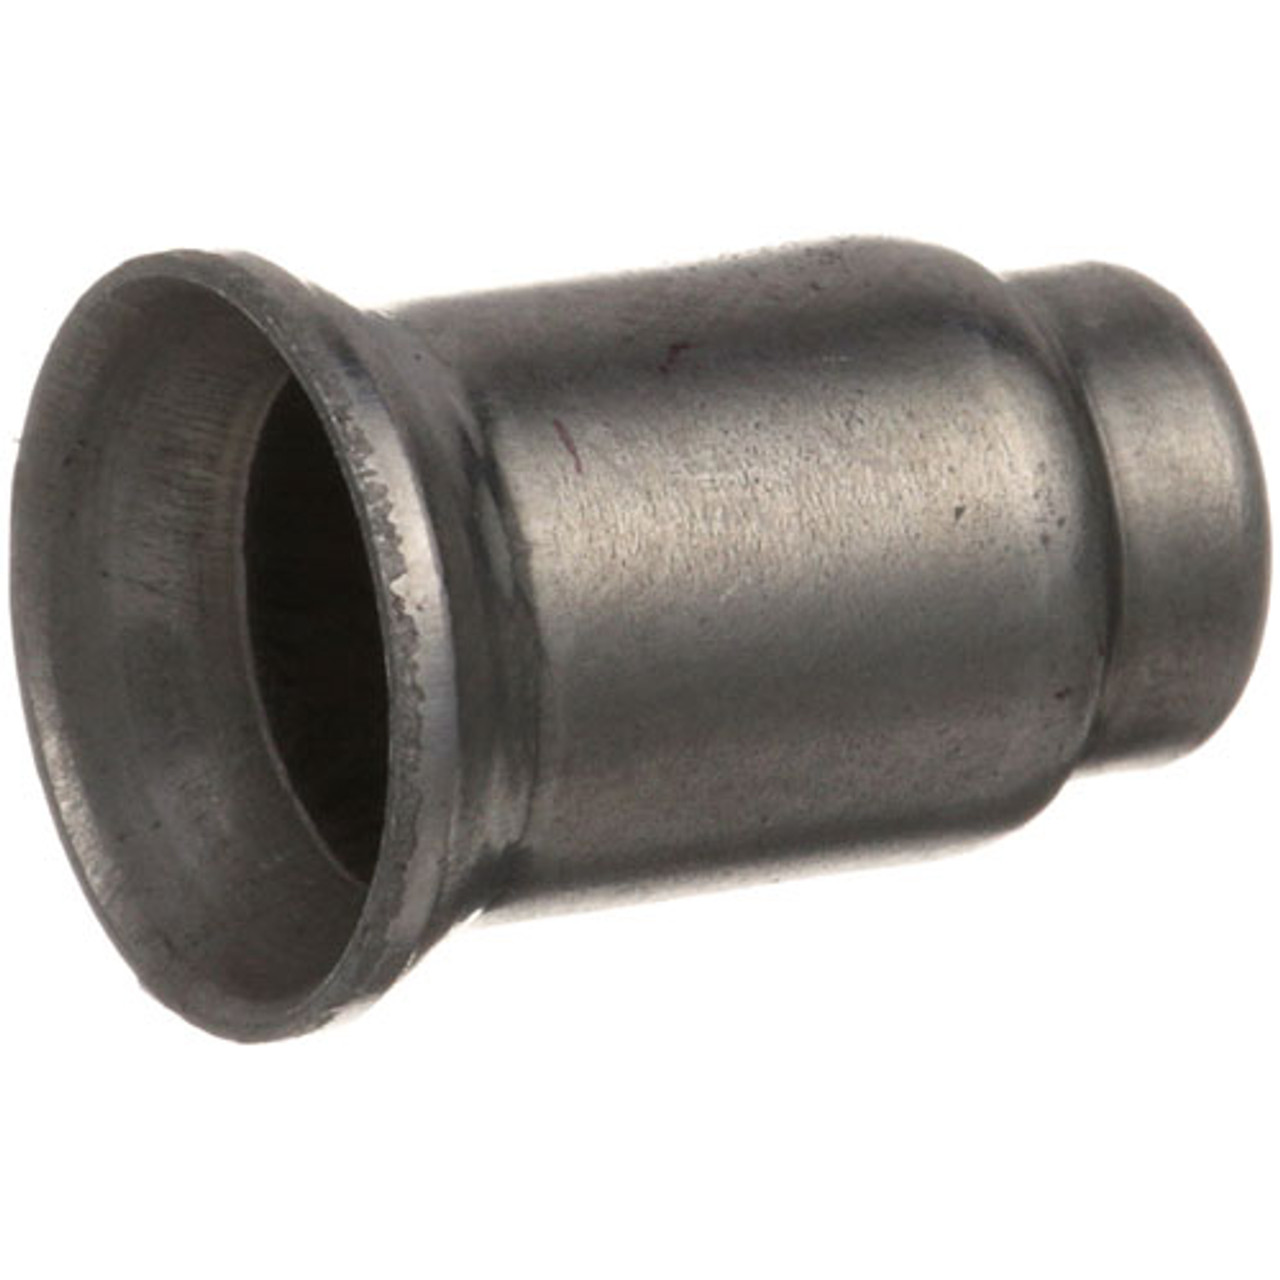 Pilot Orifice .010 - Replacement Part For Keating 7786